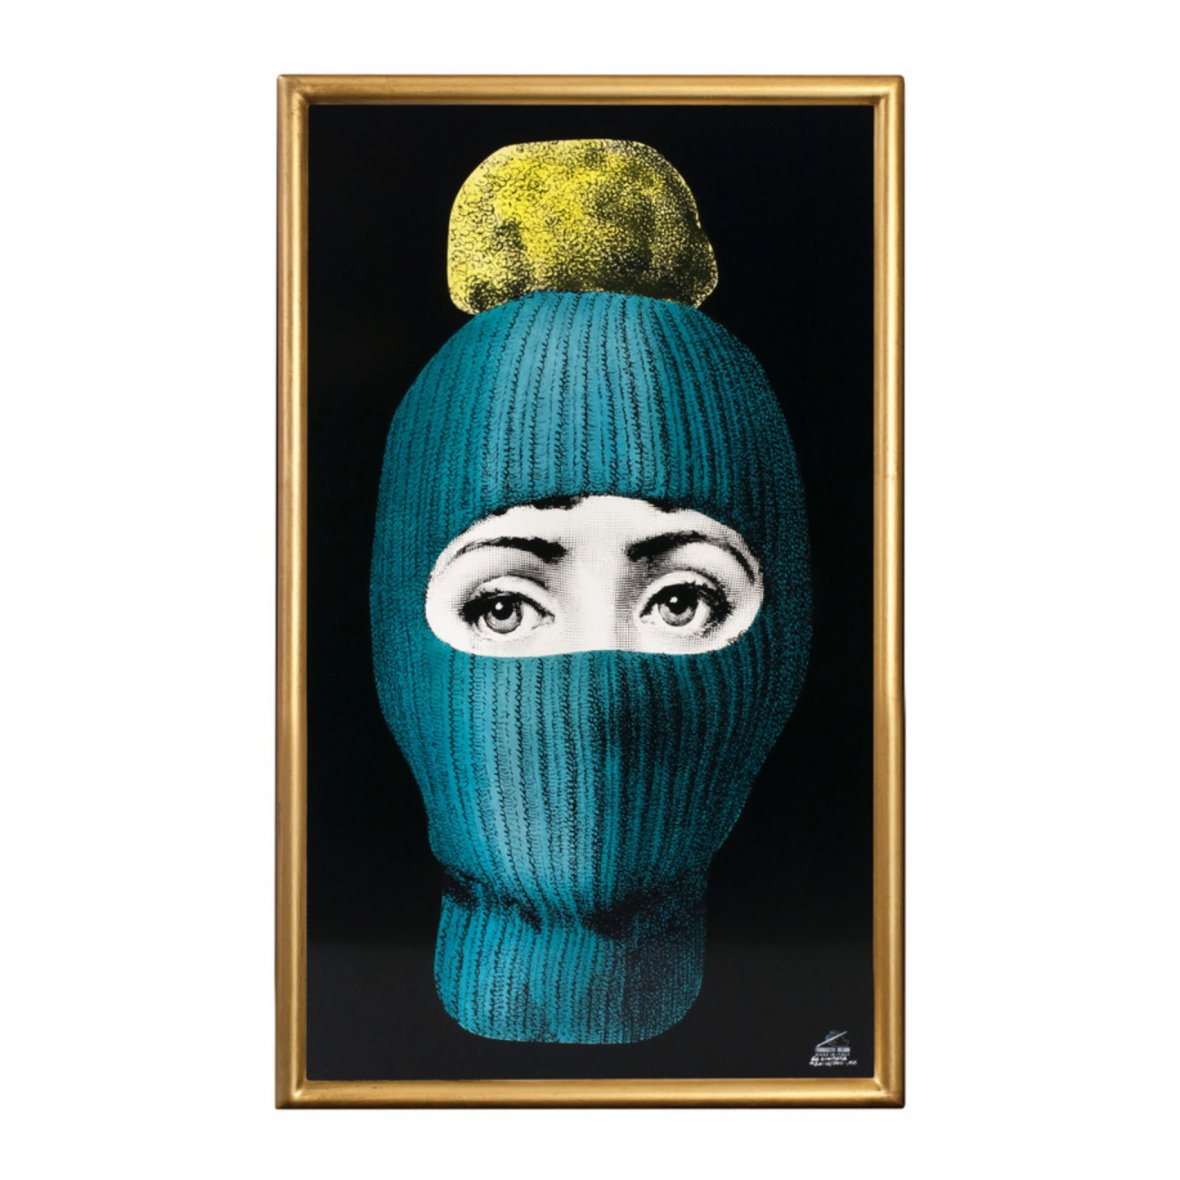 fornasetti-panel-lux-gstaad-turquoisepon-pon-yellow